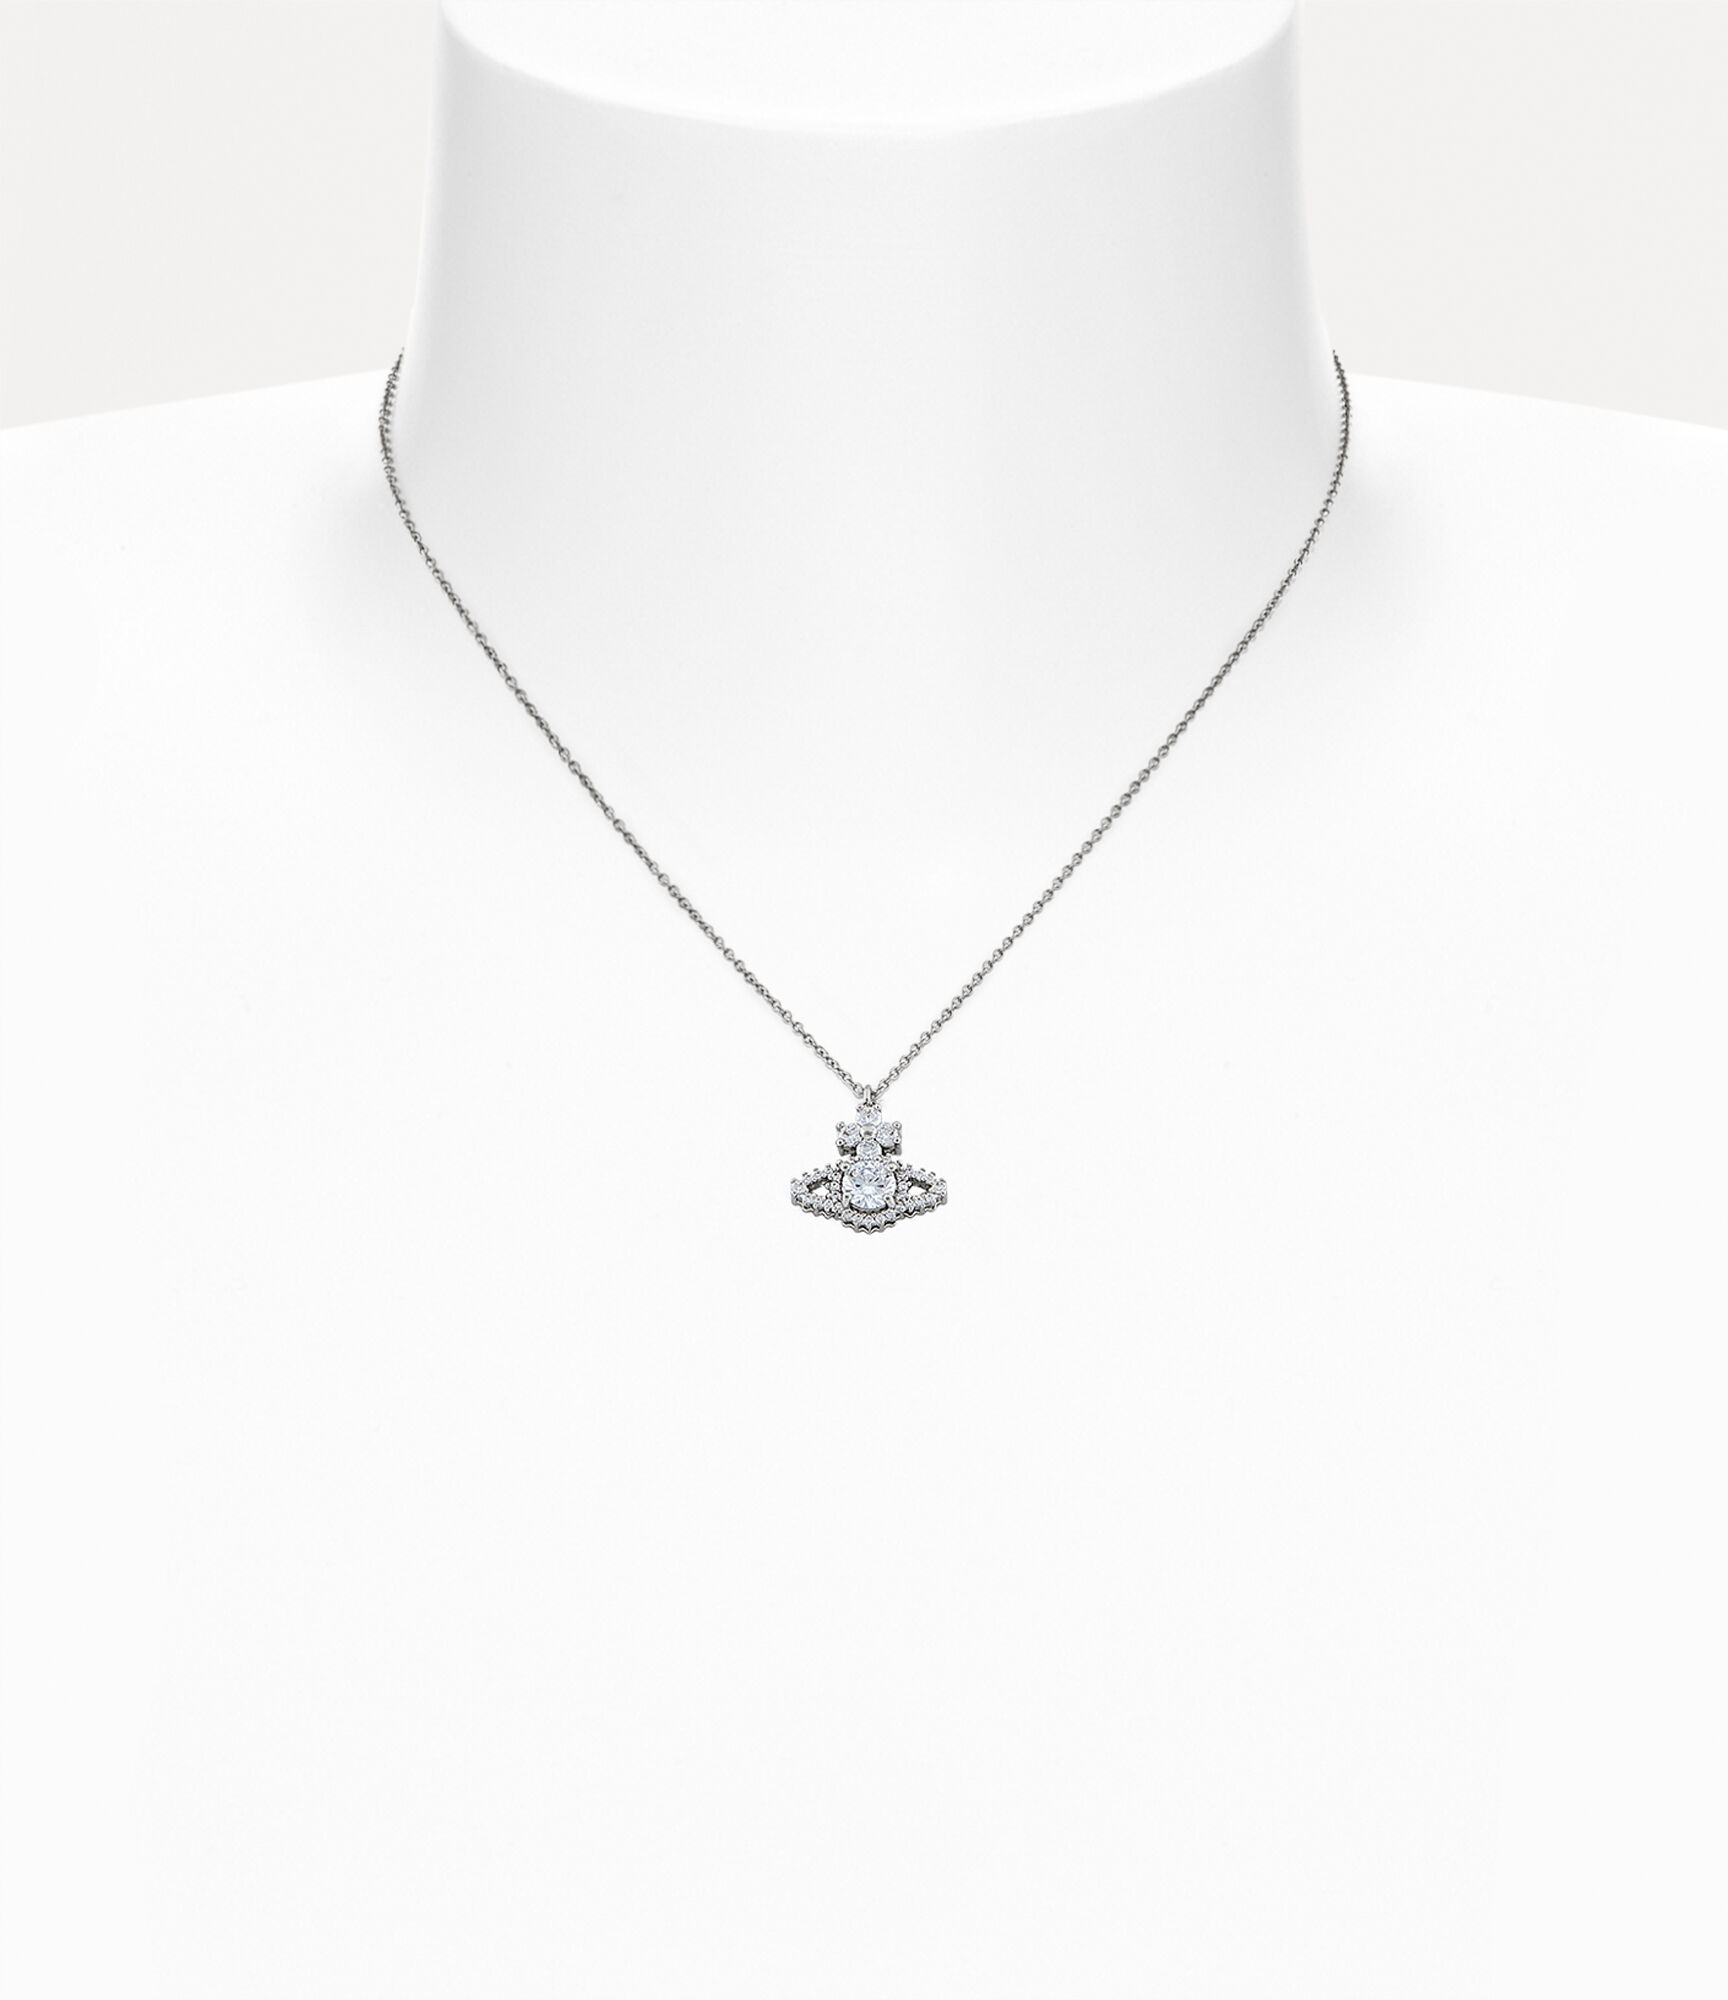 SASOM | accessories Vivienne Westwood Mayfair Small Orb Necklace In Silver-Tone  Plating Check the latest price now!